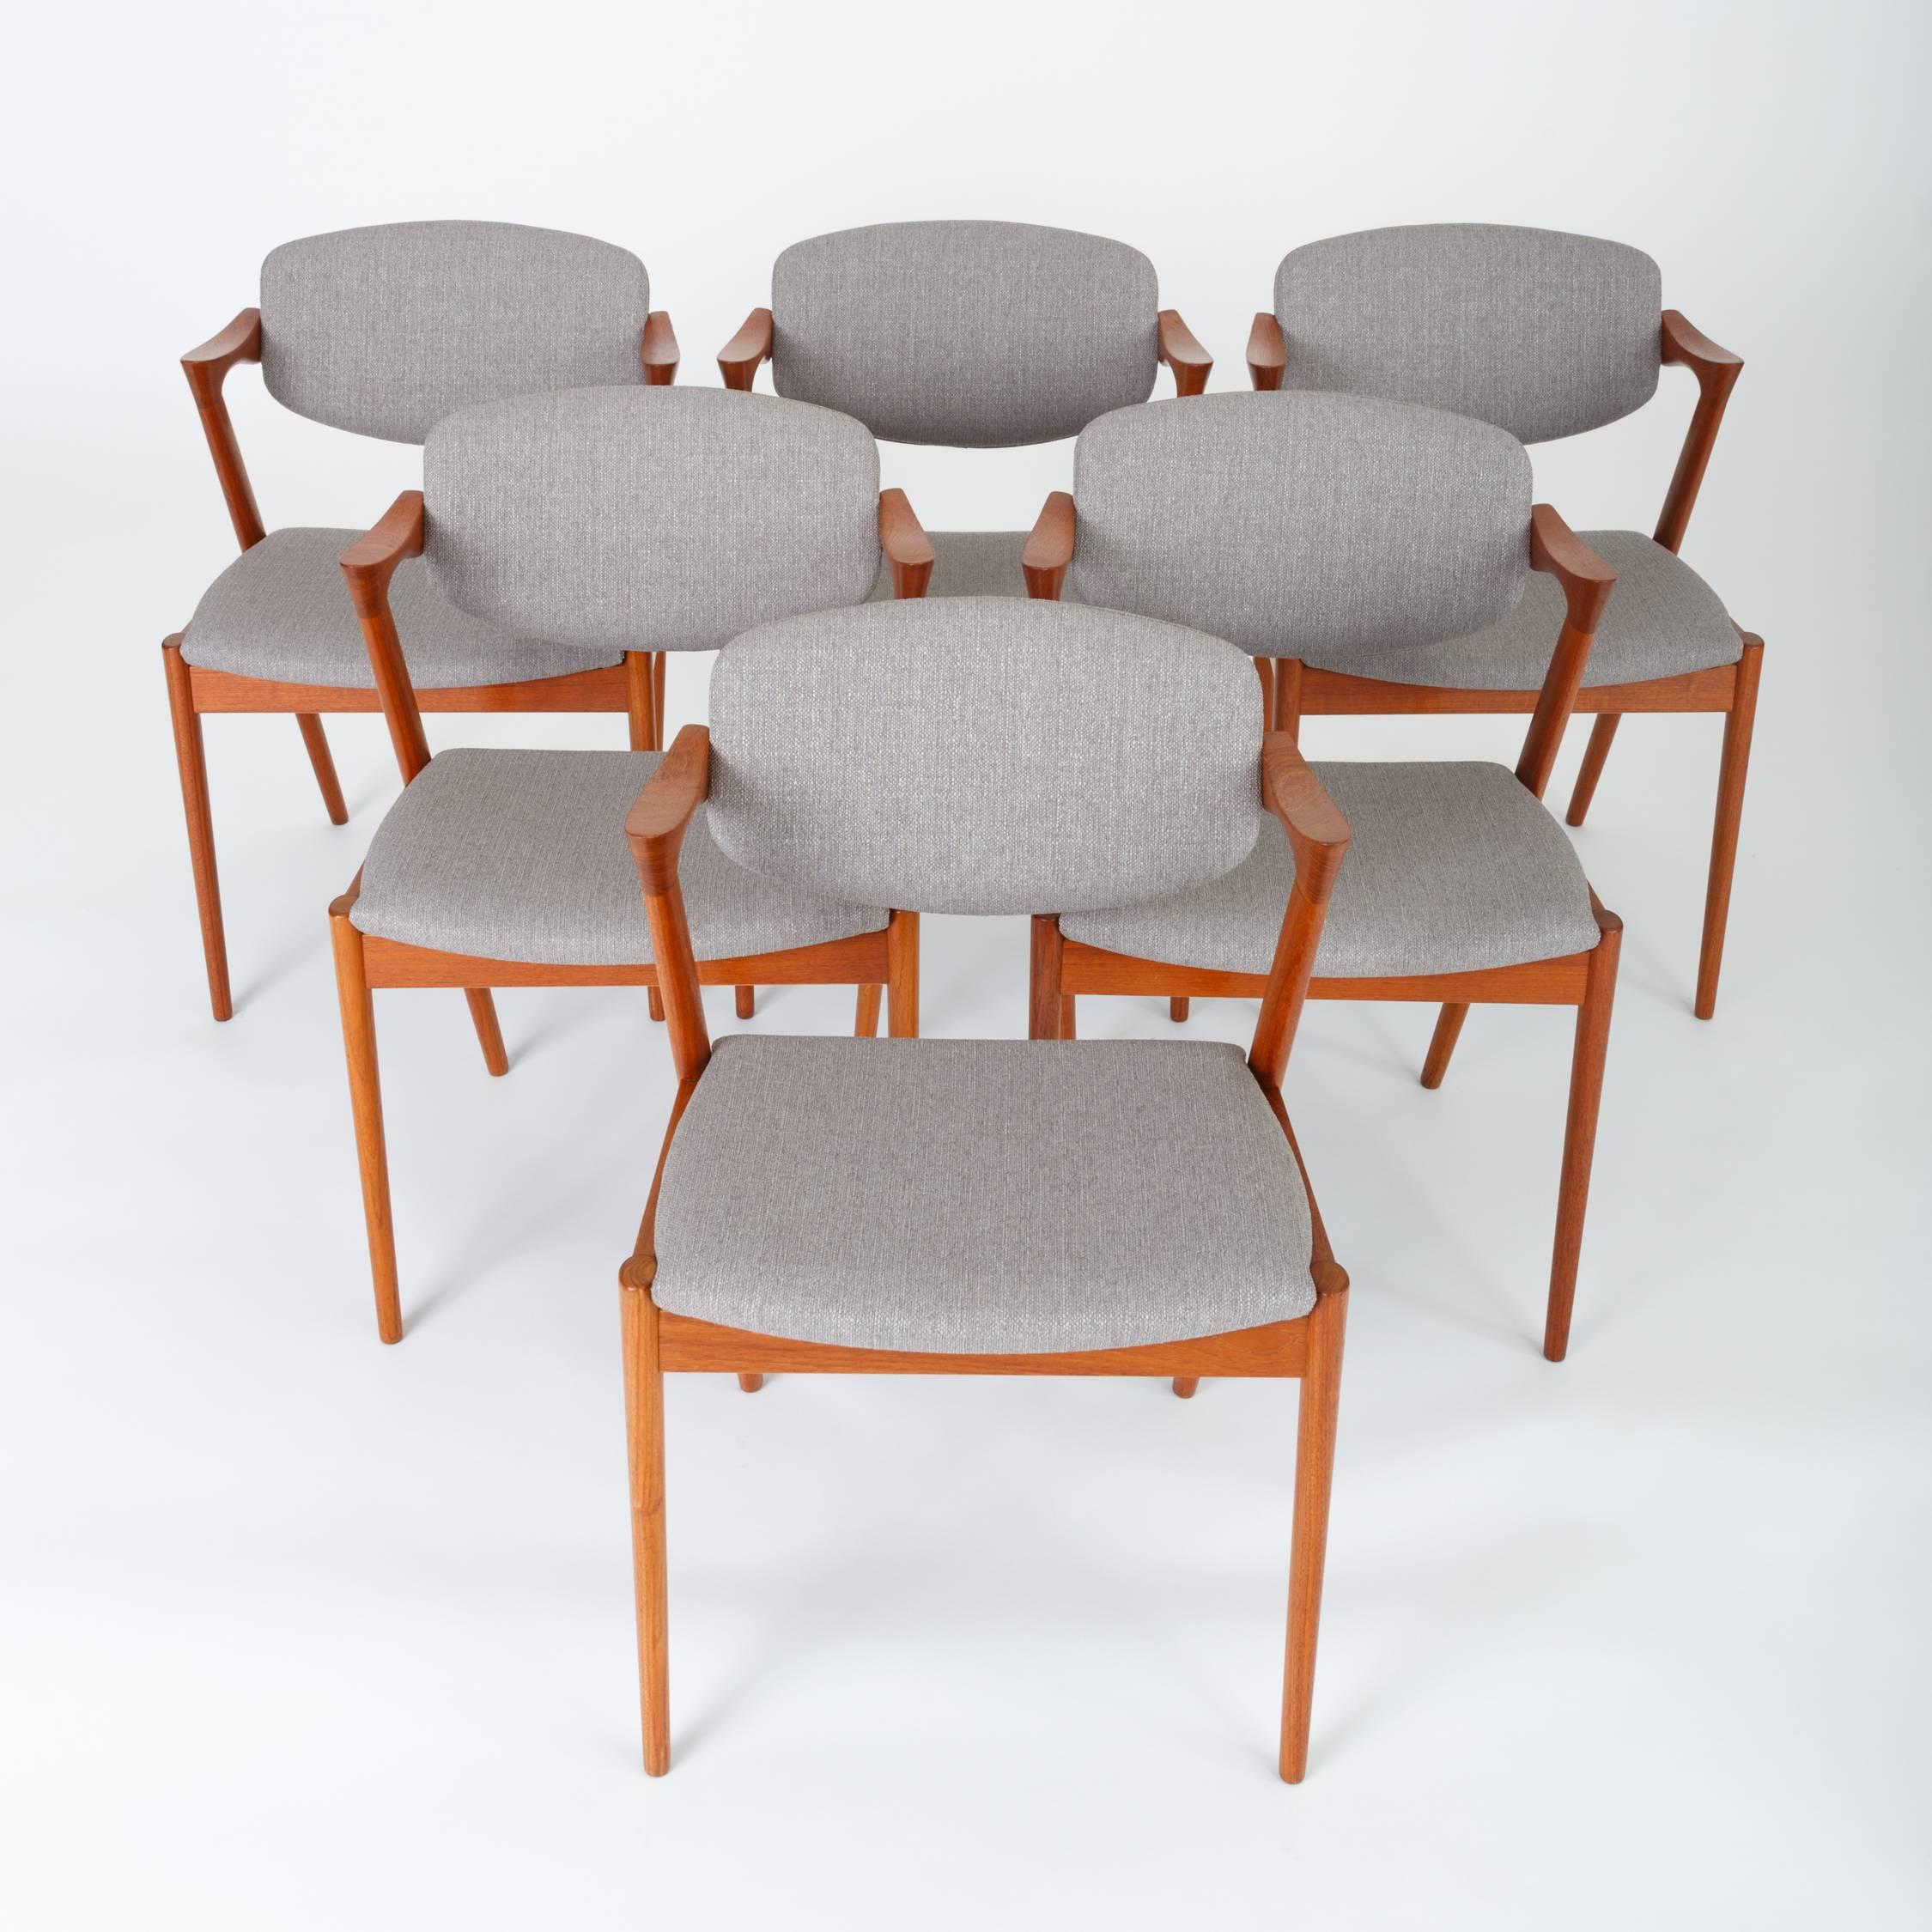 A set of six Danish modern teak dining chairs by Kai Kristiansen for Schou Andersen, with a sculpted frame and sharp lines. The model 42 chair was the first chair to with armrests supported by the rear legs of the frame, and was a critical darling